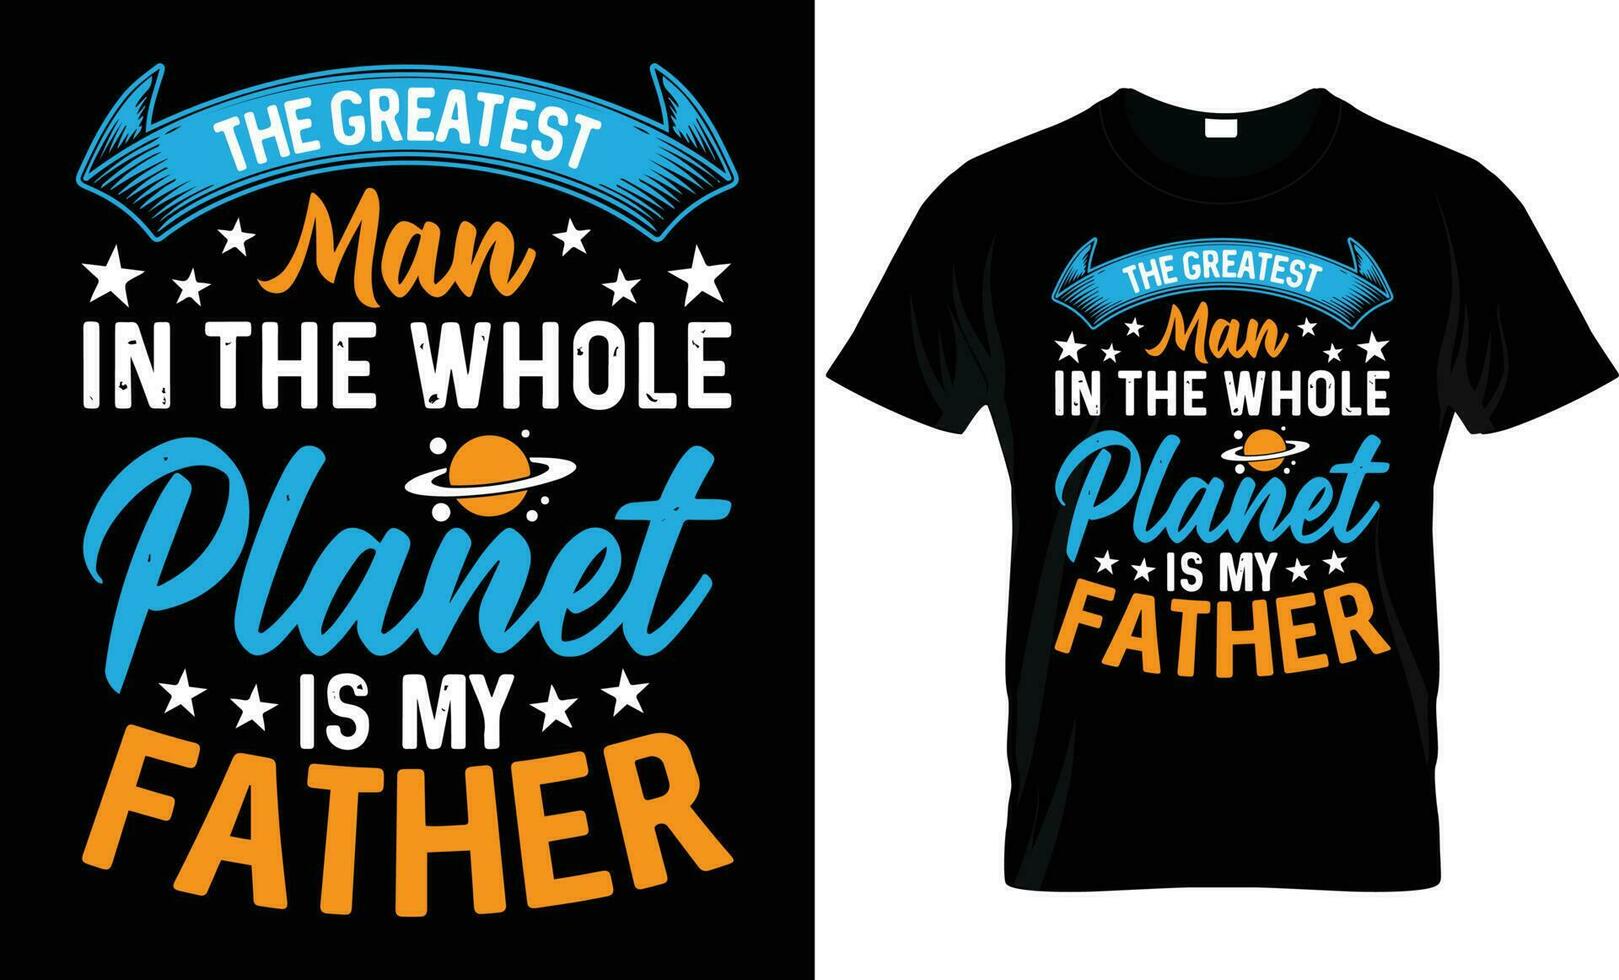 Happy father's day t shirt, Vintage Father's Day shirts, Retro Vintage Father's Day t Shirt Design, Funny Dad Lover vintage T shirt. vector